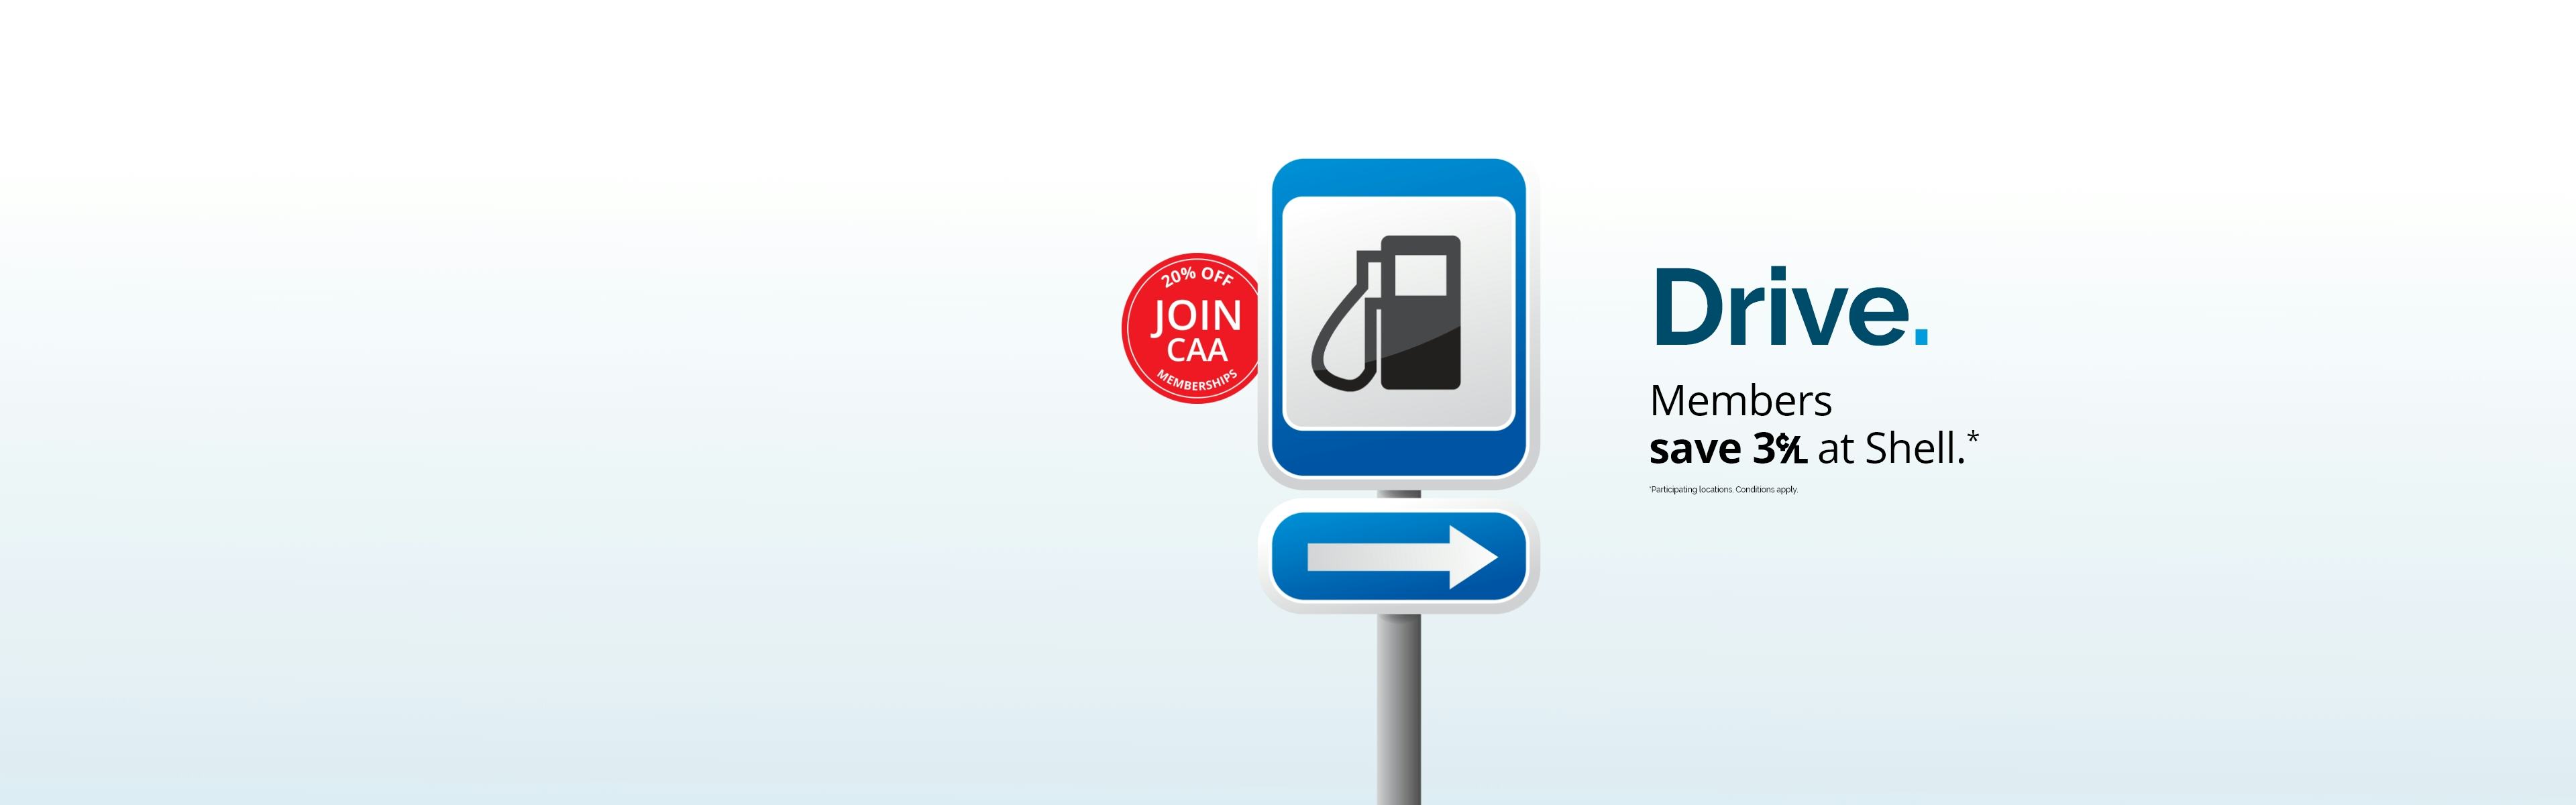 [Join CAA - 20% off Memberships]
Drive. Member save 3 cents per litre at Shell. *Participating locations. Conditions apply.